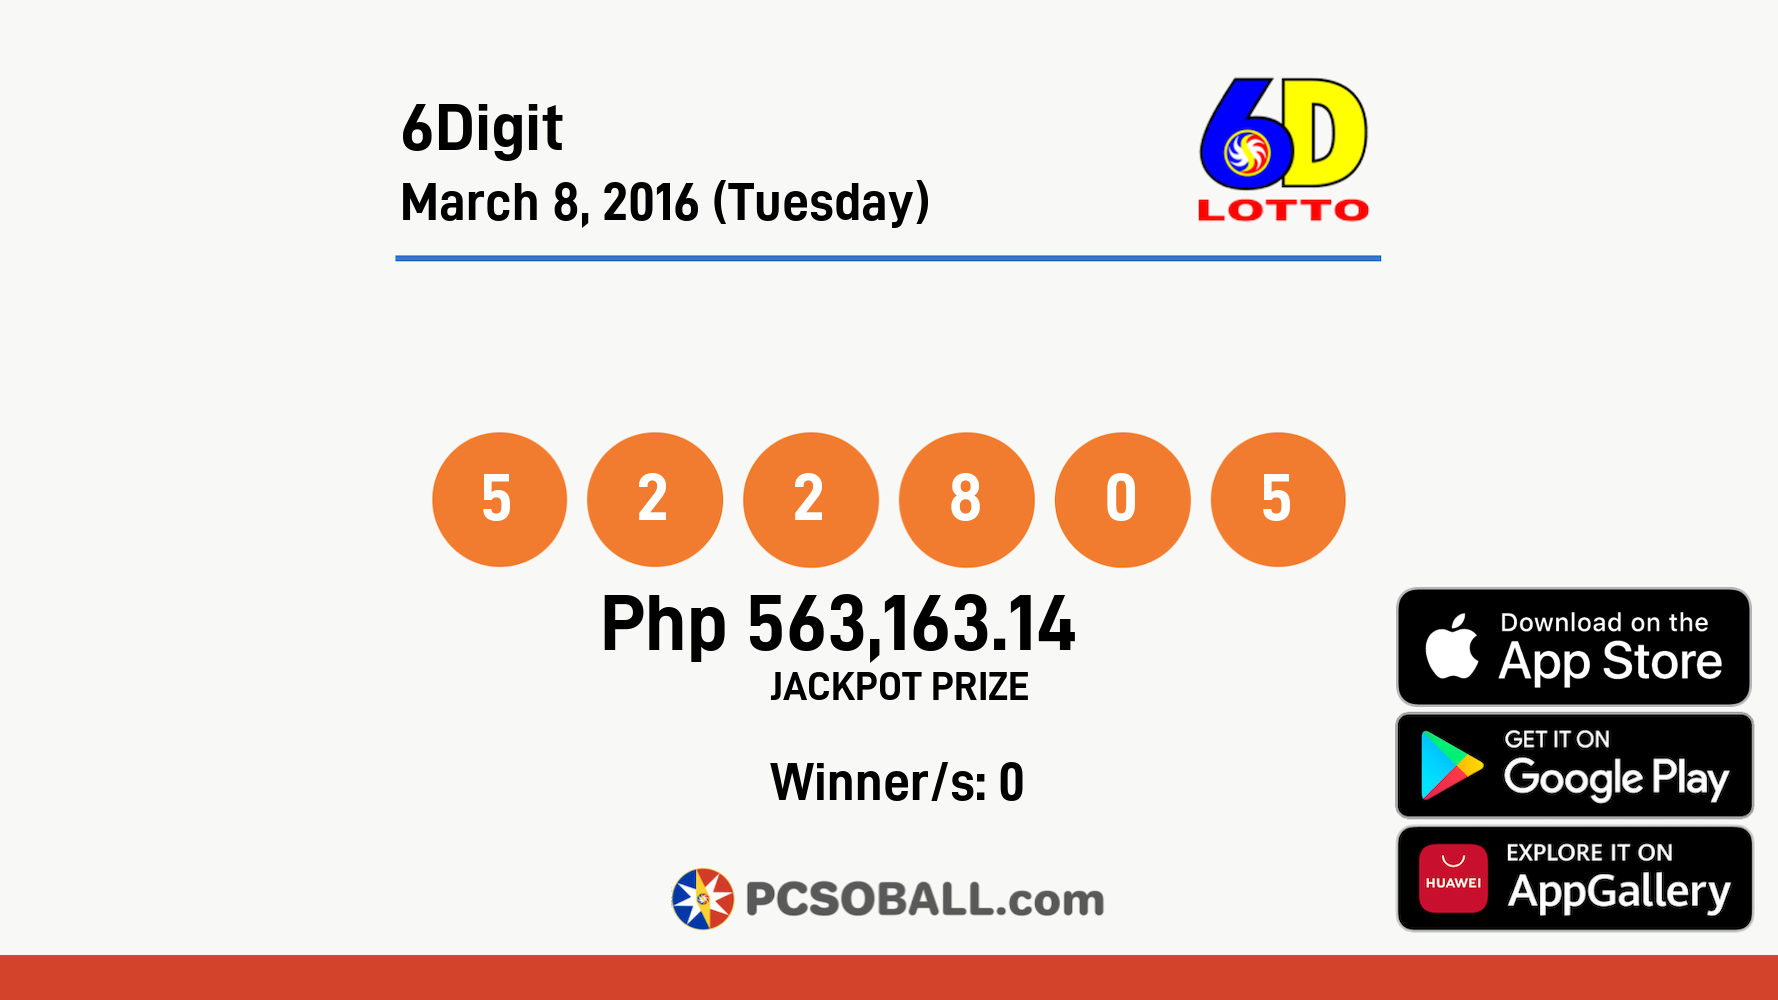 6Digit March 8, 2016 (Tuesday) Result